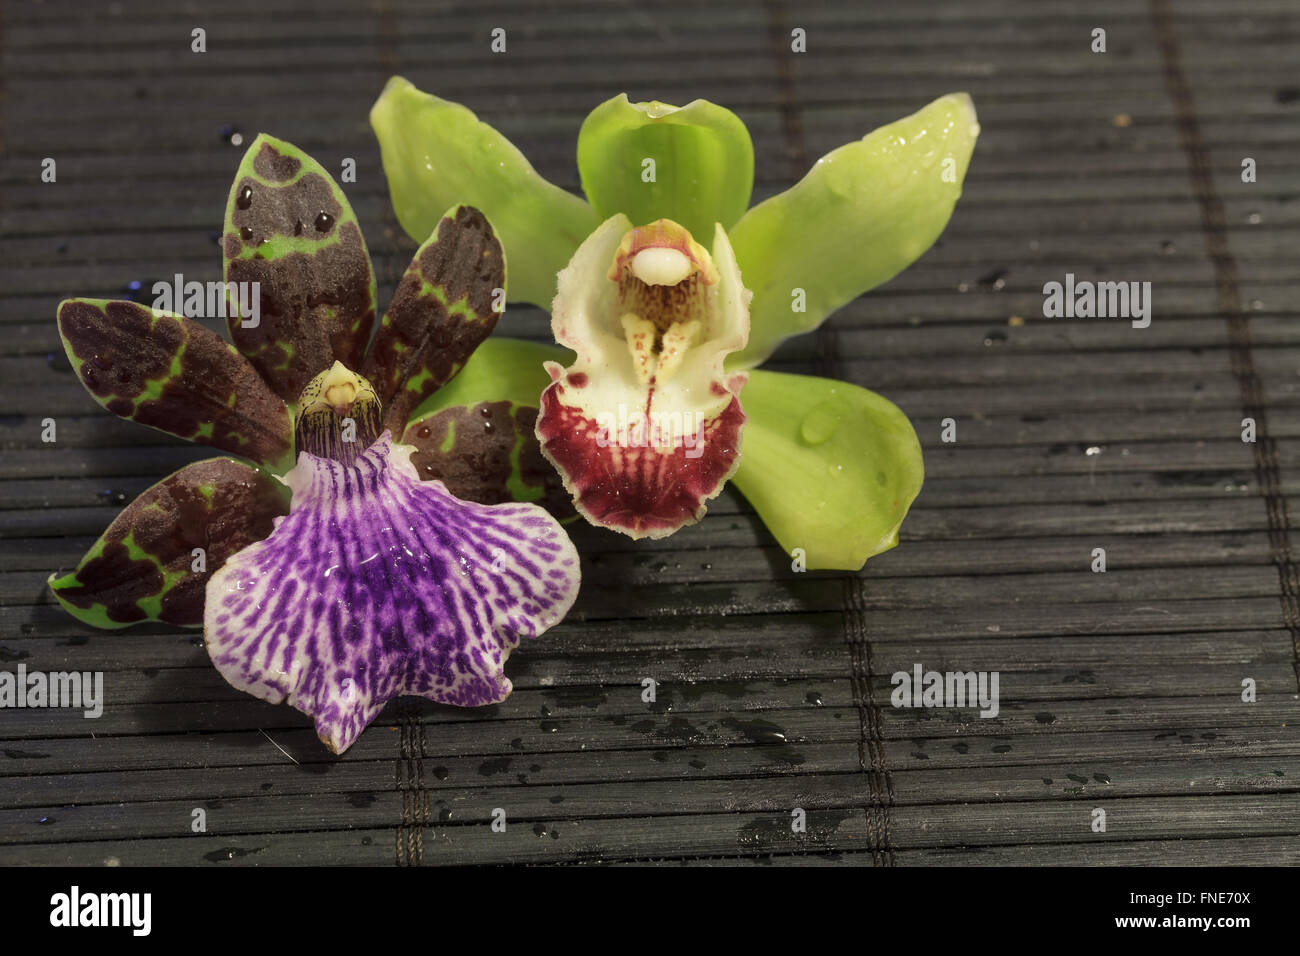 Purple and green orchid, Zygopetalum species, beside a green and red Cymbidium species on a black bamboo mat background Stock Photo